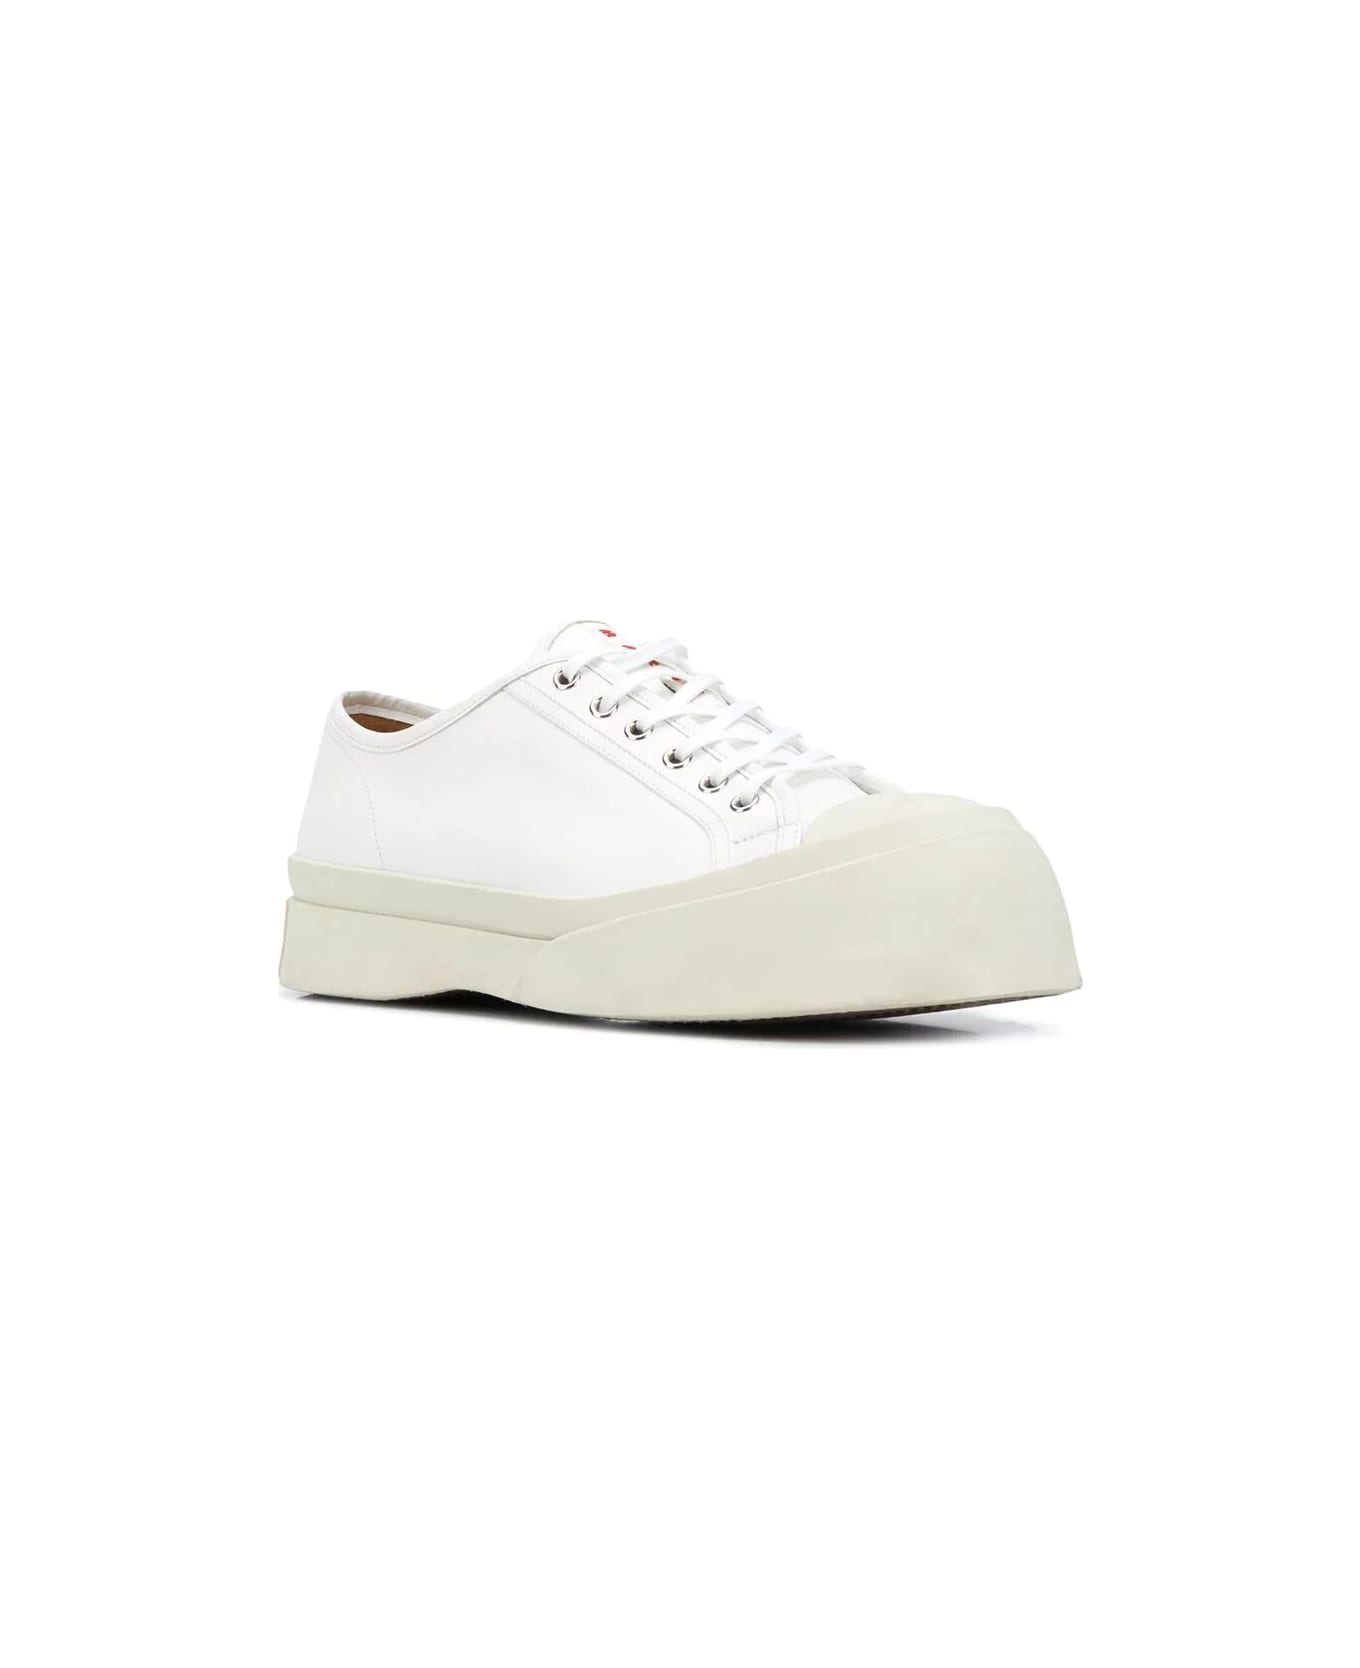 Marni Lace Up Sneakers - Lily White スニーカー